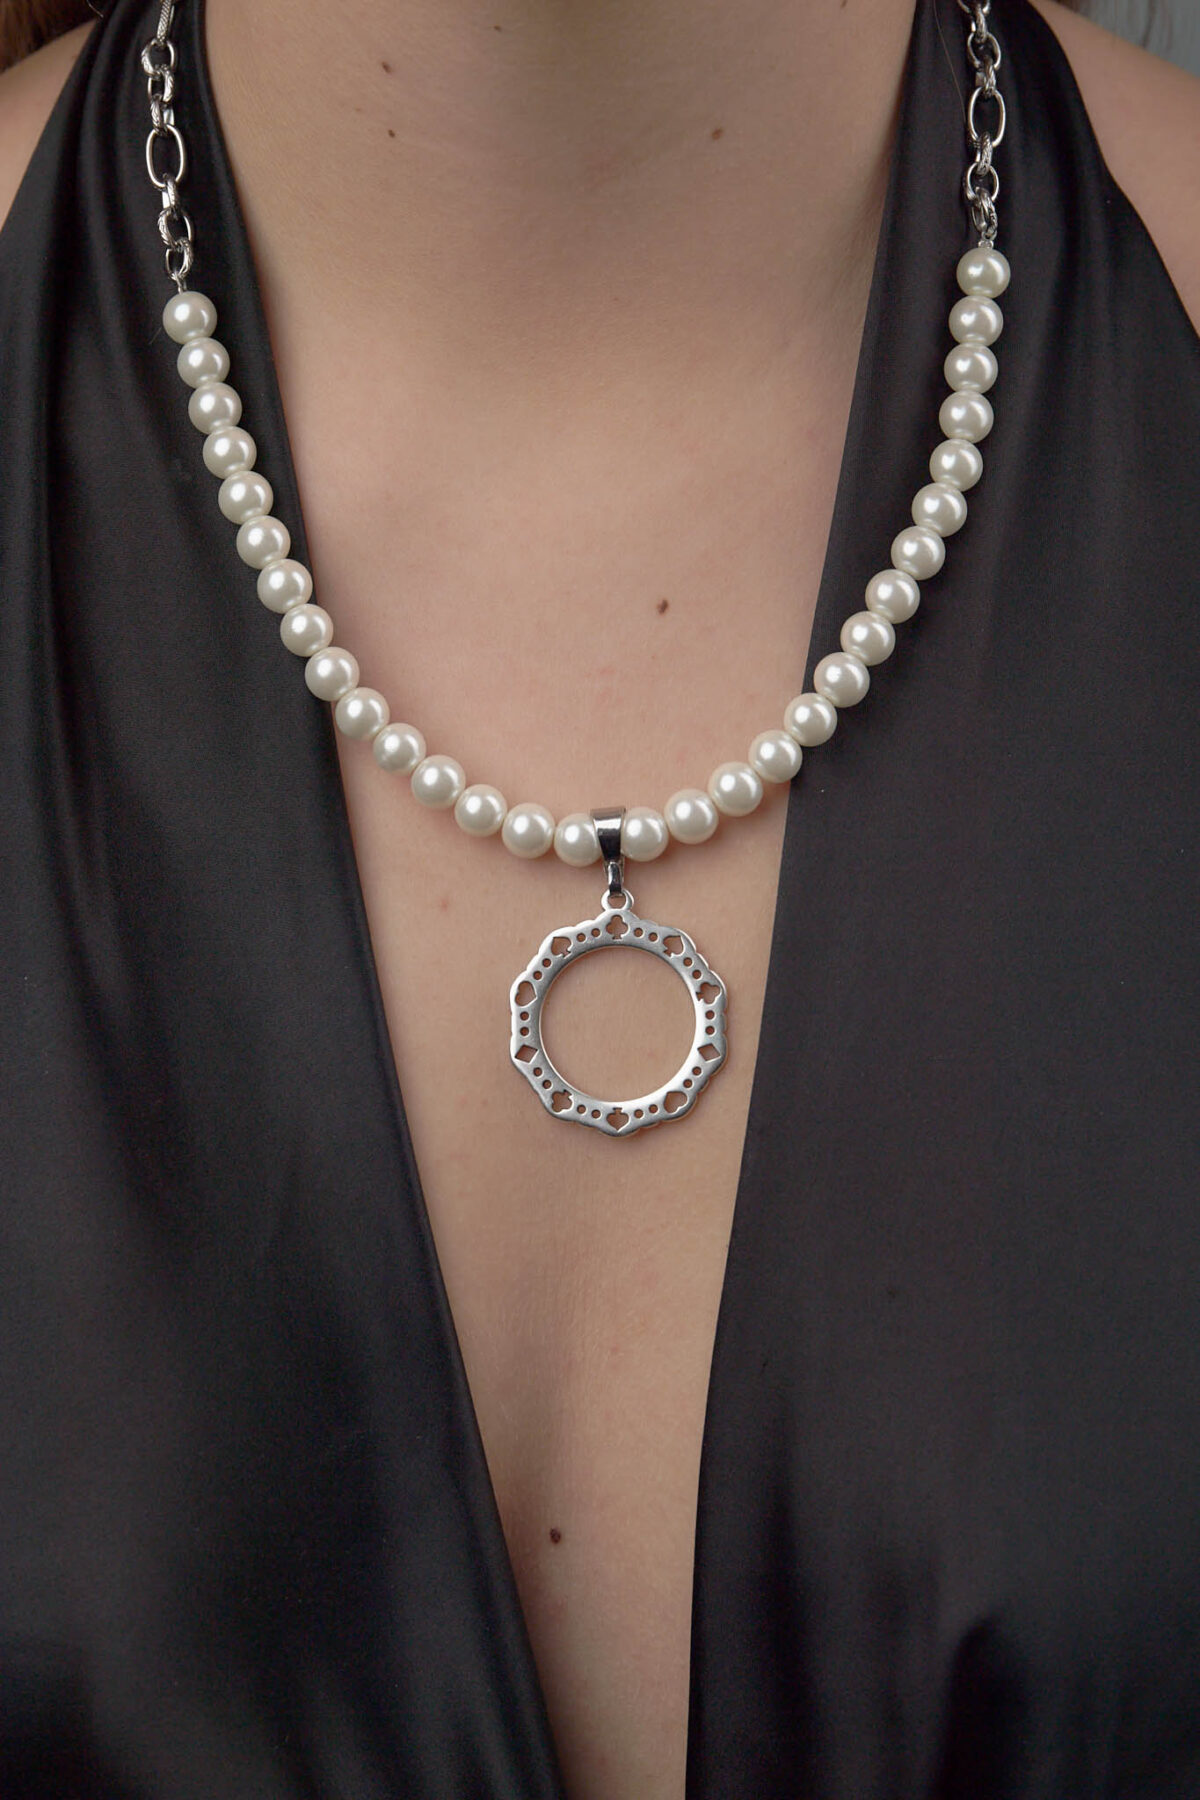 Necklace With White Pearls And Round Metallic Motif